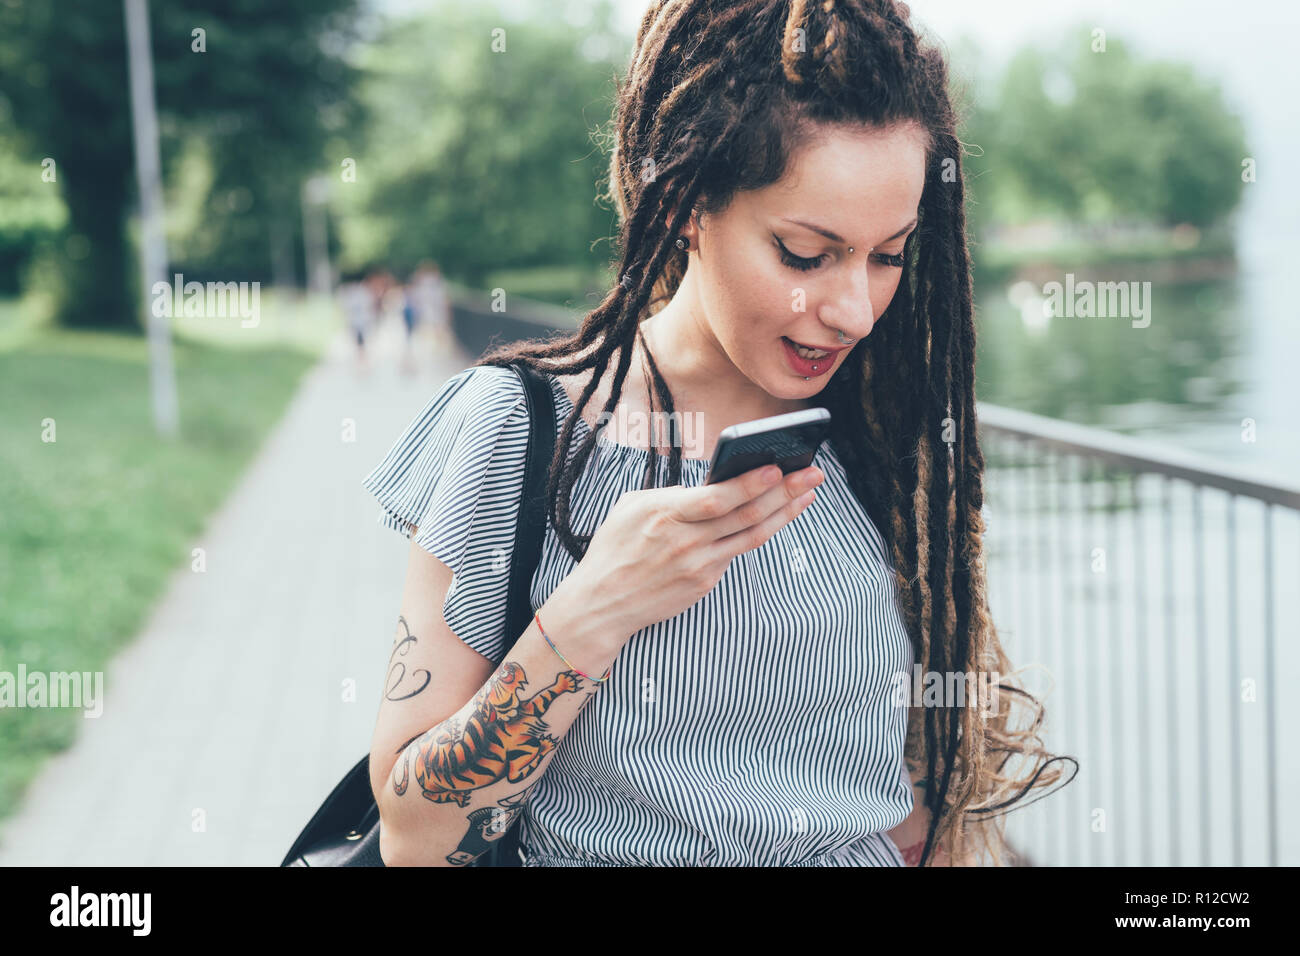 Woman using mobile phone in park Stock Photo